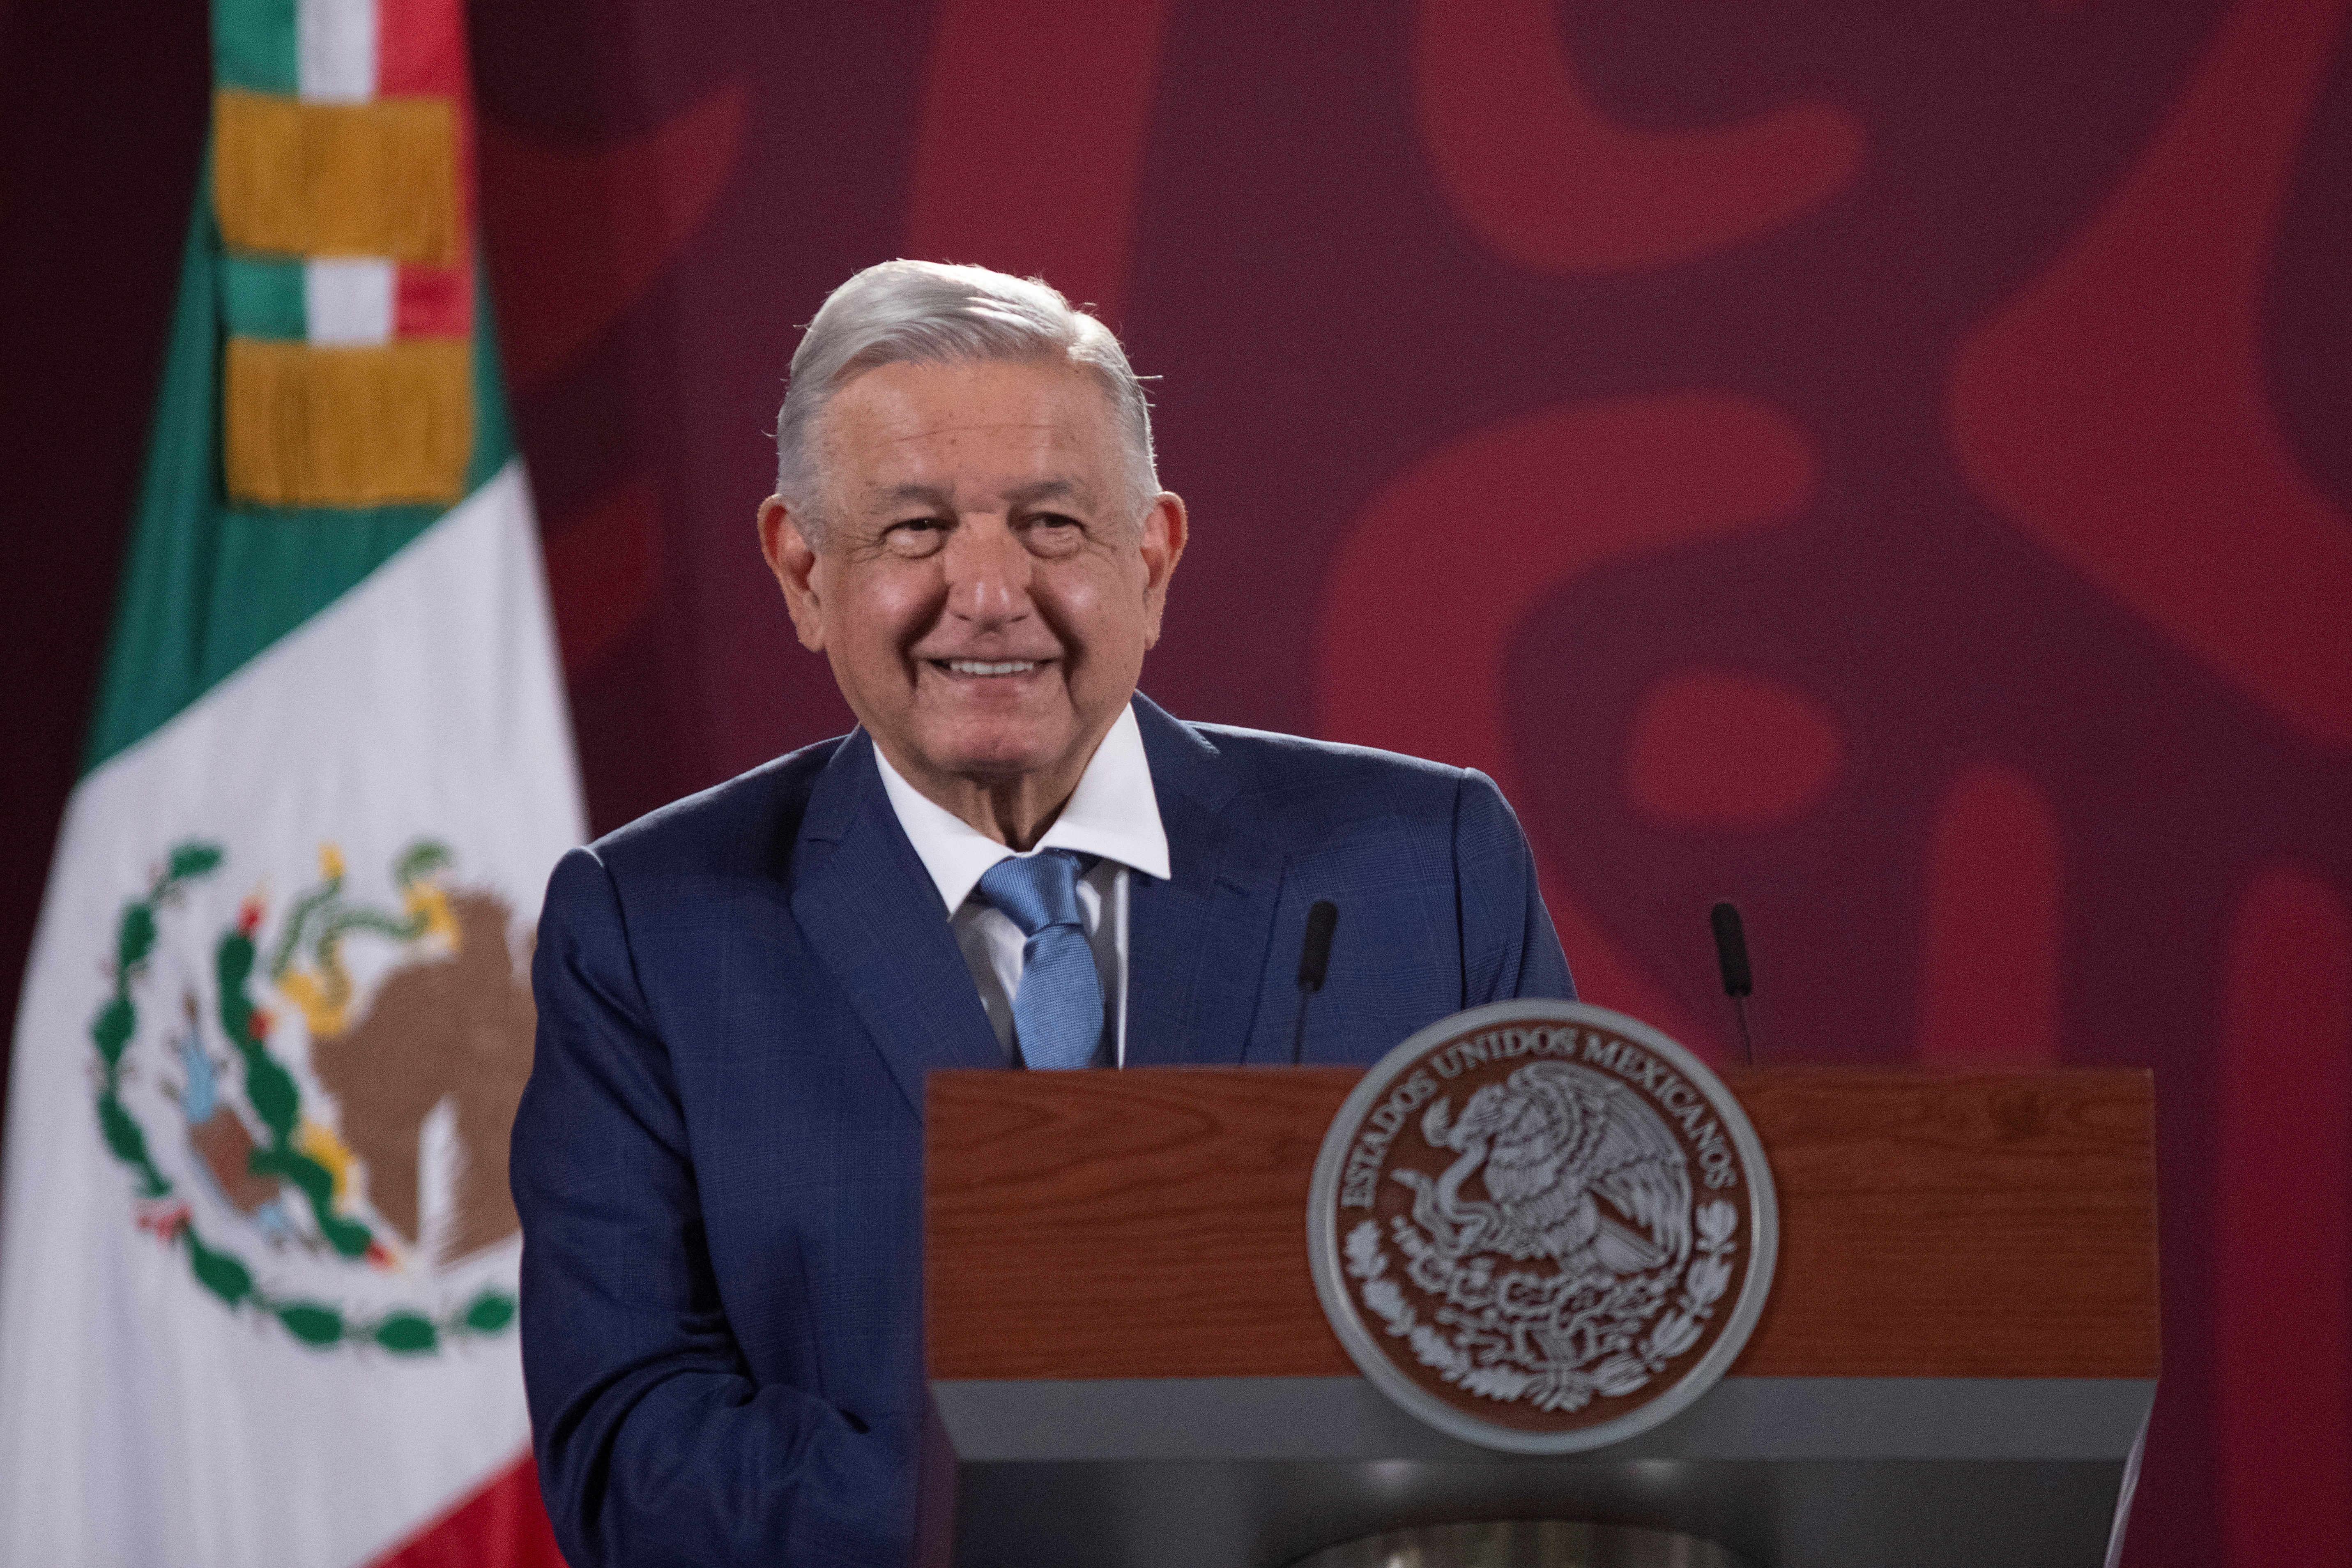 Mexico's President Andres Manuel Lopez Obrador speaks during a news conference about that he has been in touch with the leaders of Bolivia, Argentina and Chile to create a lithium association, at the National Palace in Mexico City, Mexico May 3, 2022. Mexico's Presidency/Handout via REUTERS ATTENTION EDITORS - THIS IMAGE WAS PROVIDED BY A THIRD PARTY. NO RESALES. NO ARCHIVES